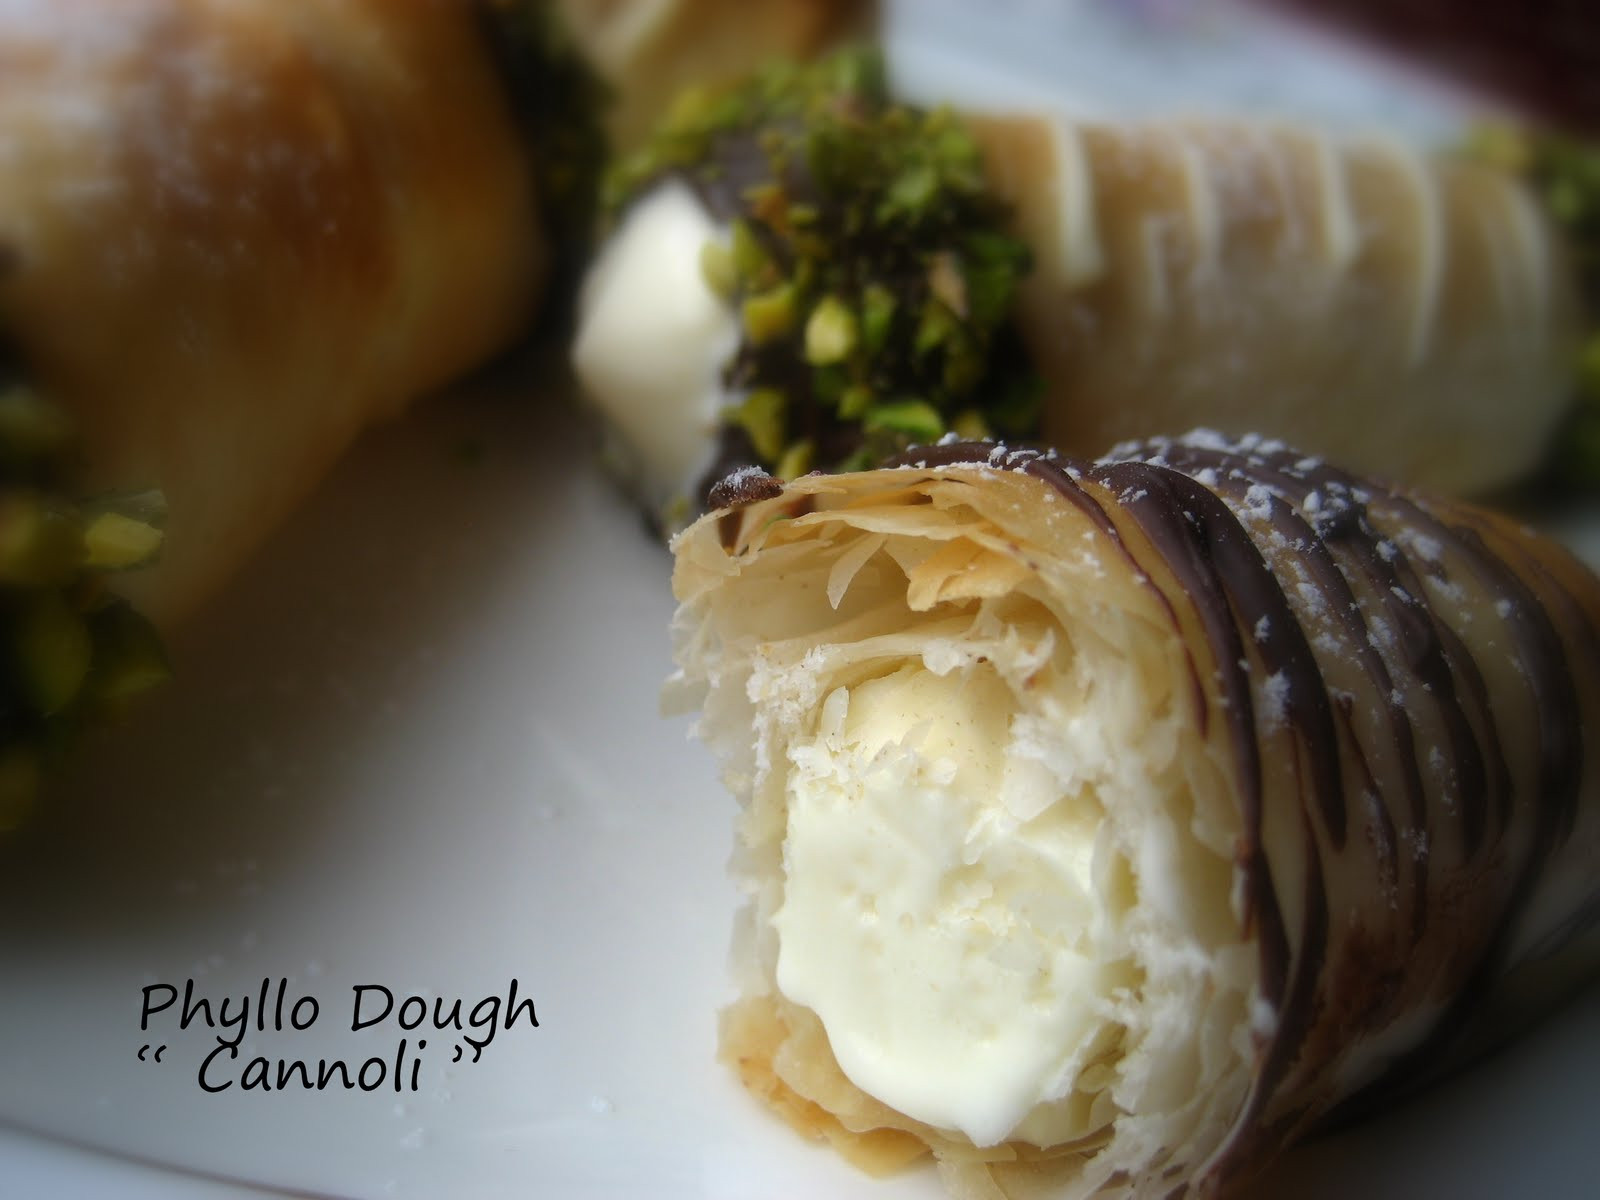 Phyllo Dough Dessert Recipe
 Home Cooking In Montana Phyllo Dough " Cannoli " lled